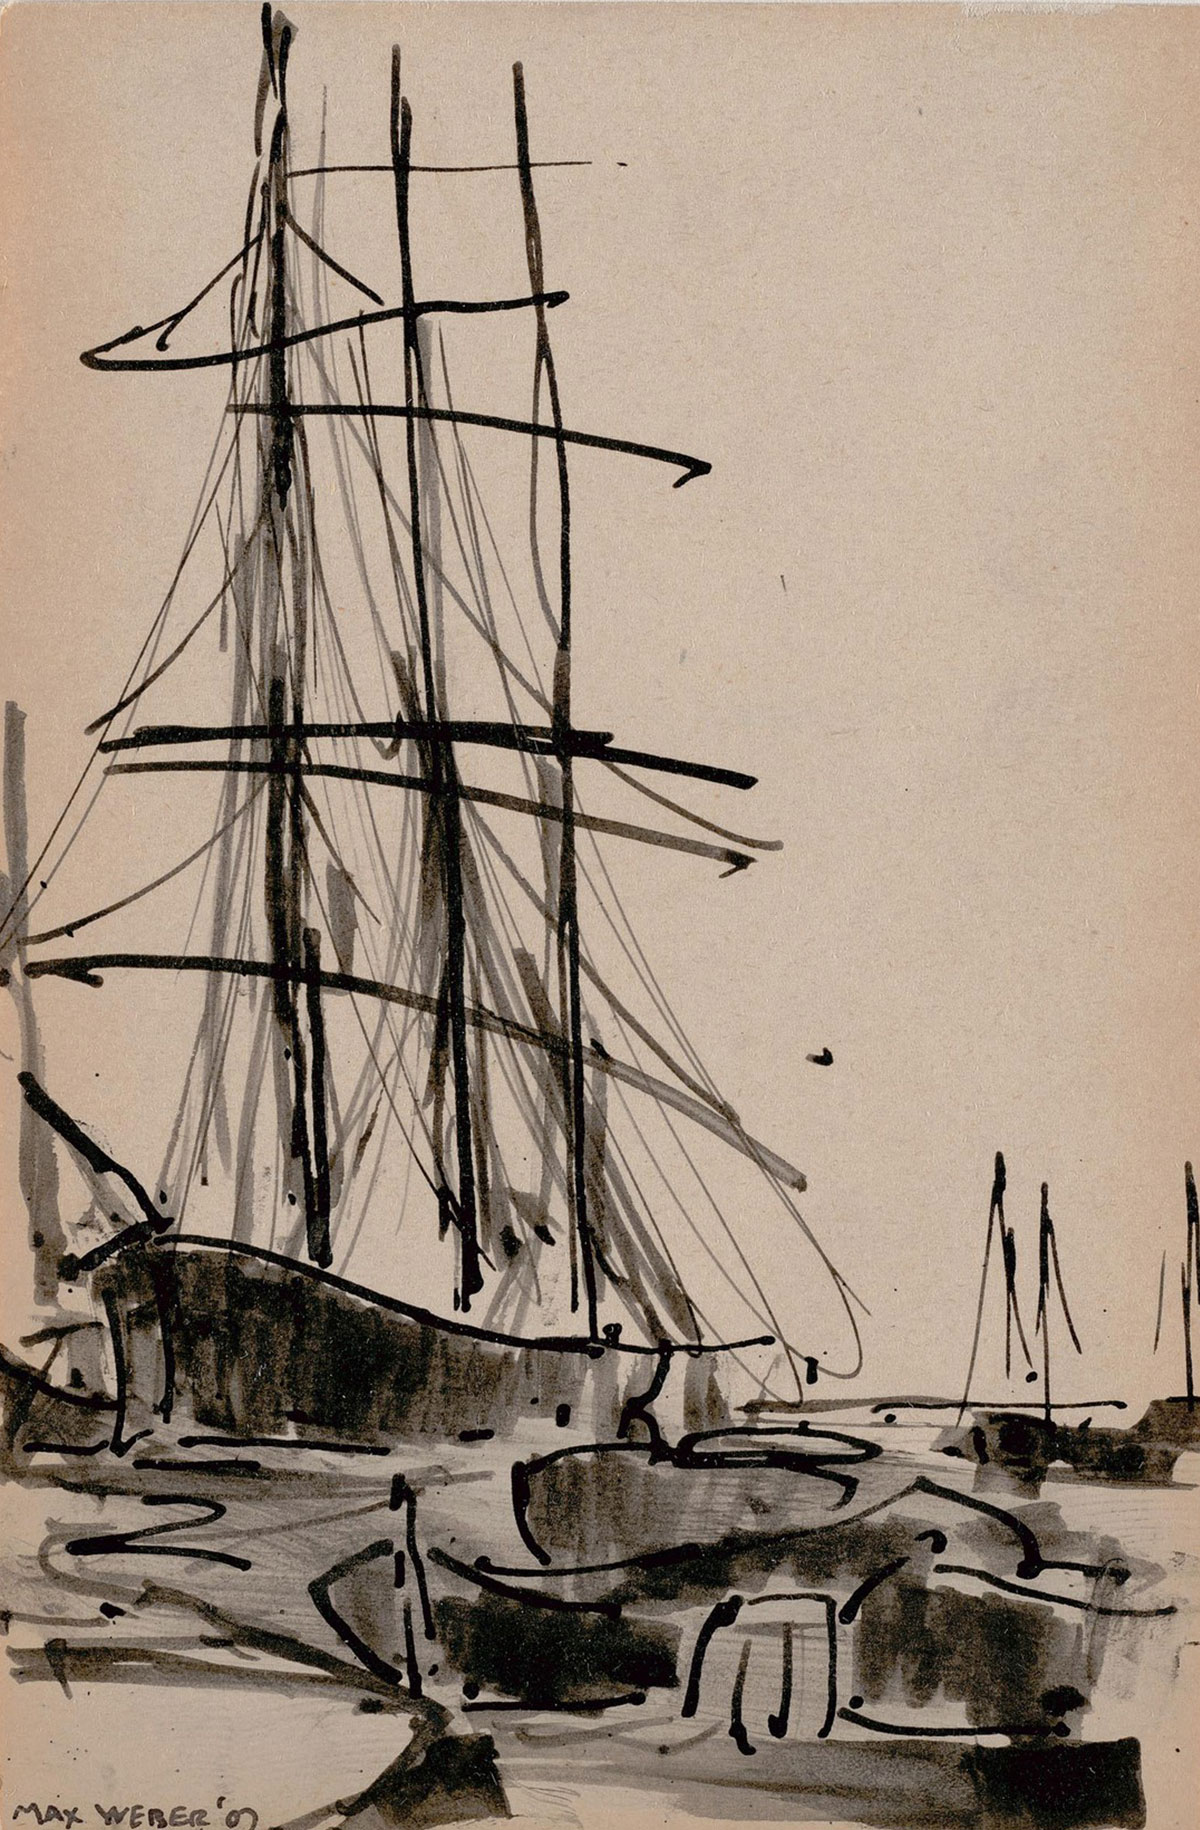 An ink drawing of a ship with tall sails on the water